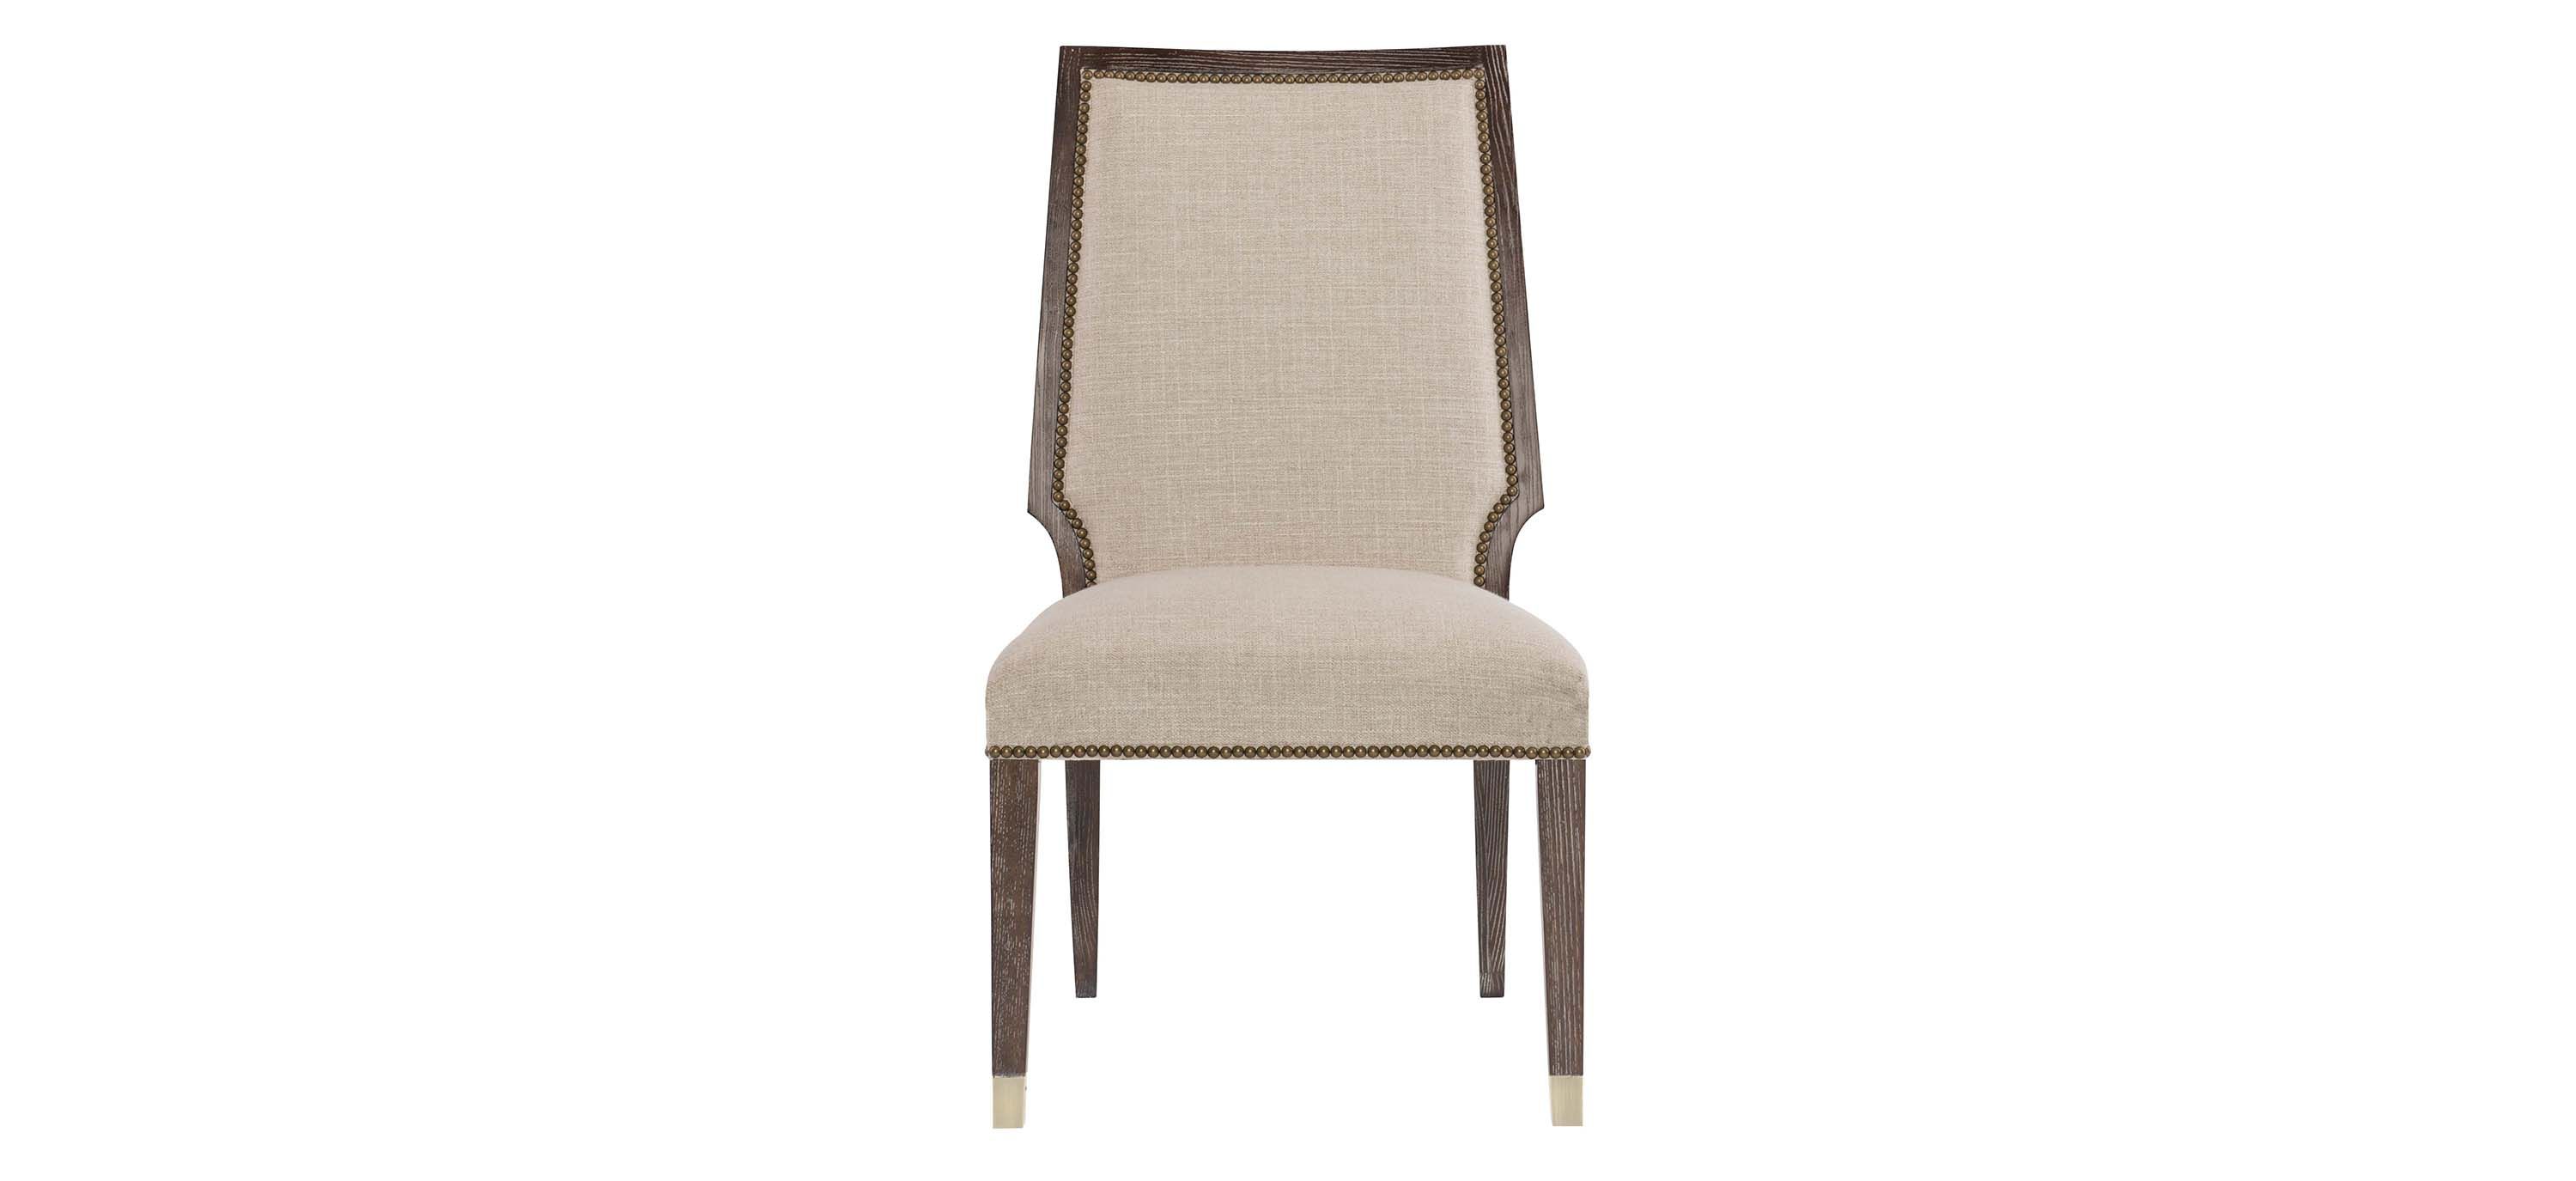 Clarendon Side Chair